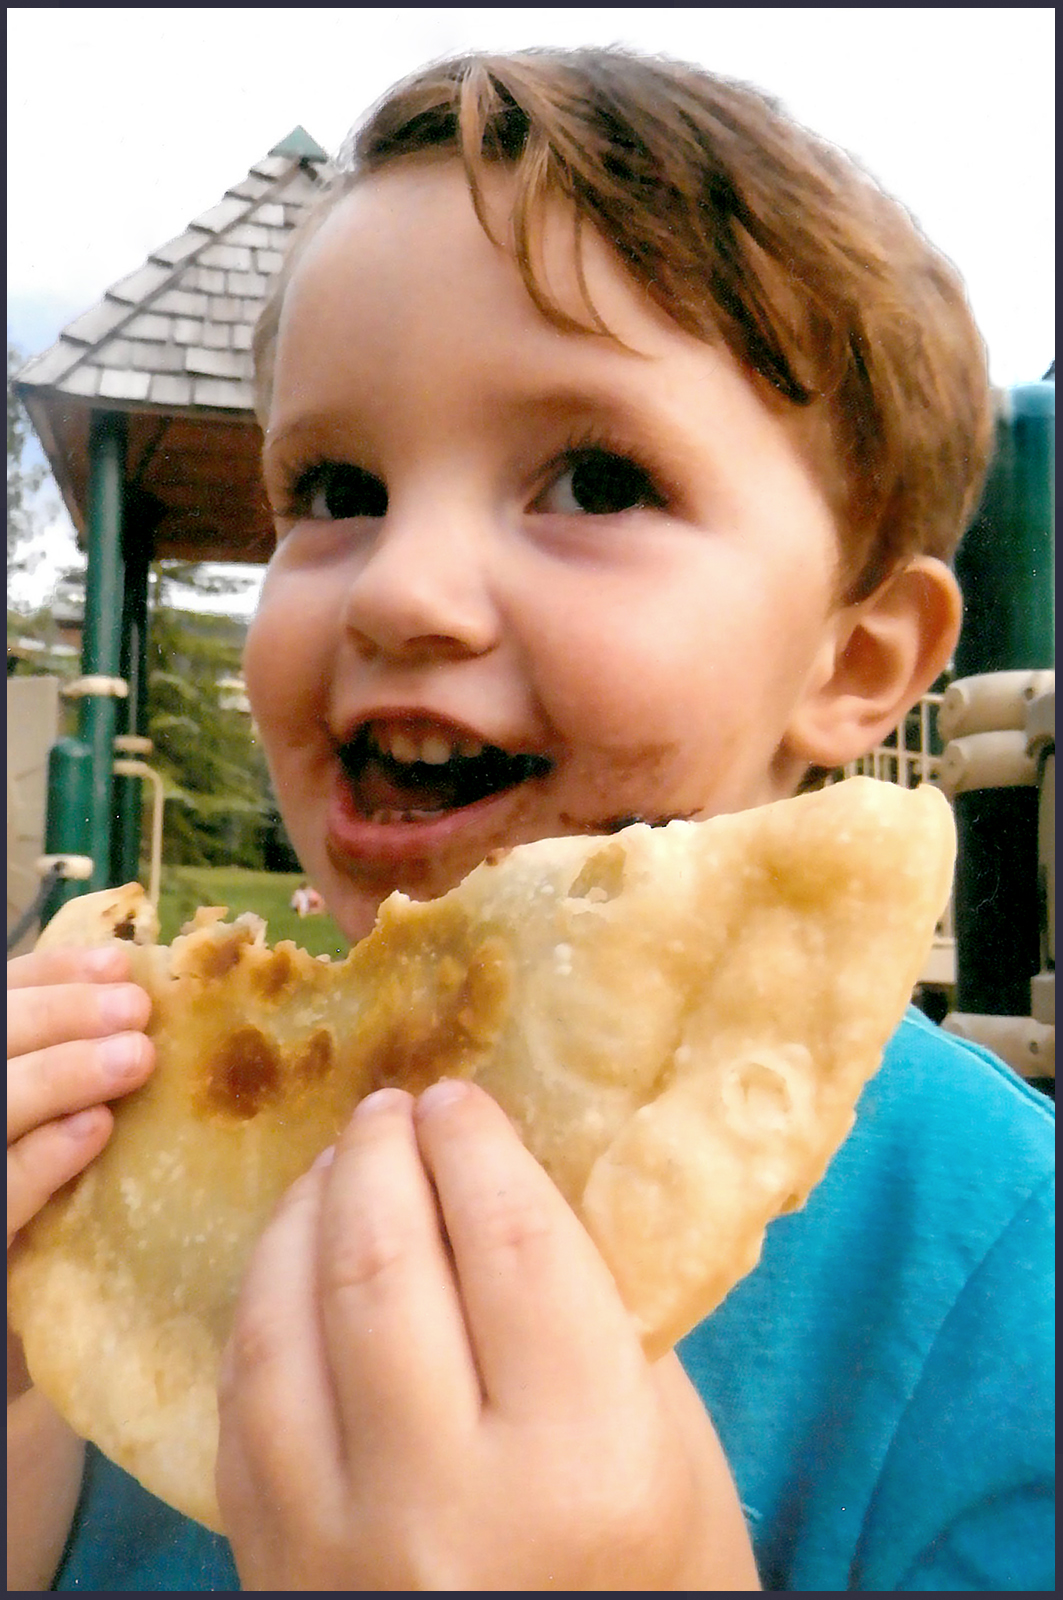 Close up of a young boy eating a fried chocolate pie.